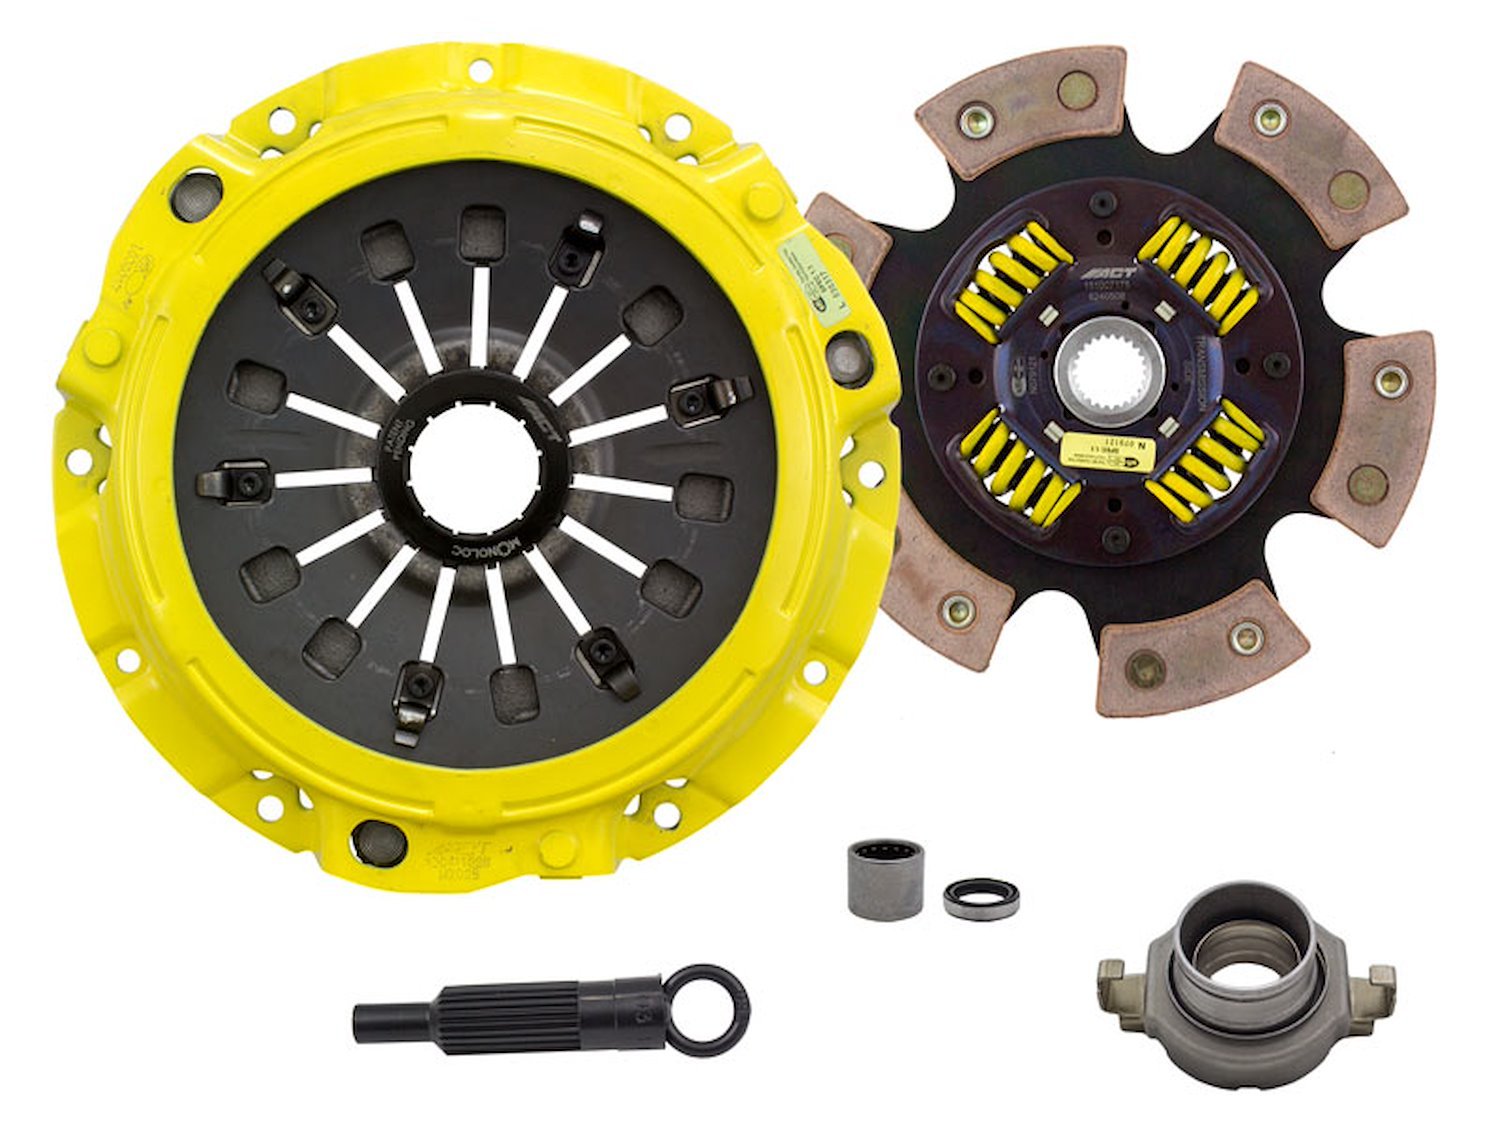 HD-M/Race Sprung 6-Pad Transmission Clutch Kit Fits Select Ford/Lincoln/Mercury/Mazda